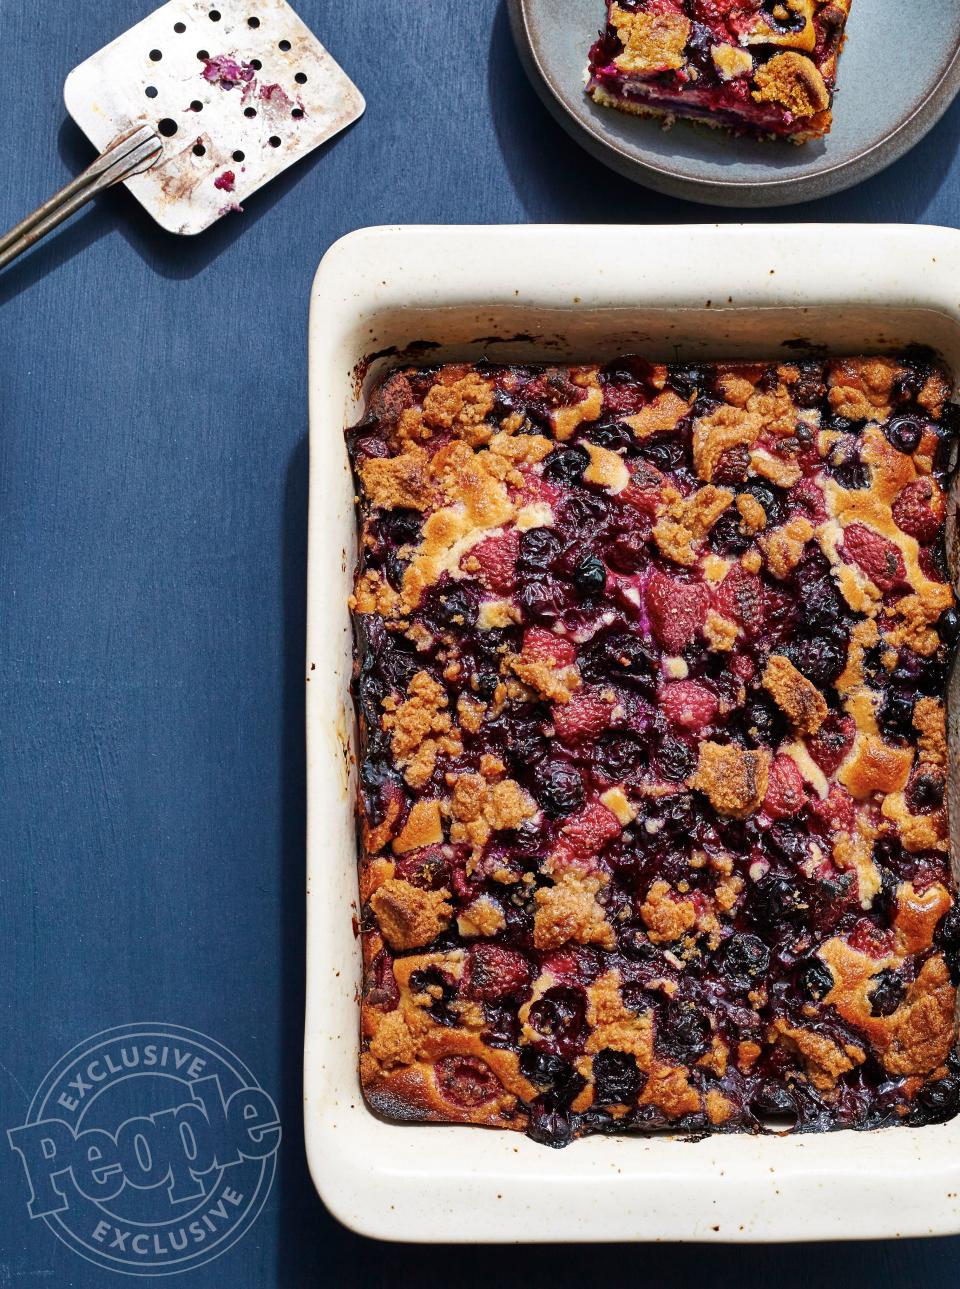 PATTI LABELLE'S SUMMER BERRY BUCKLE